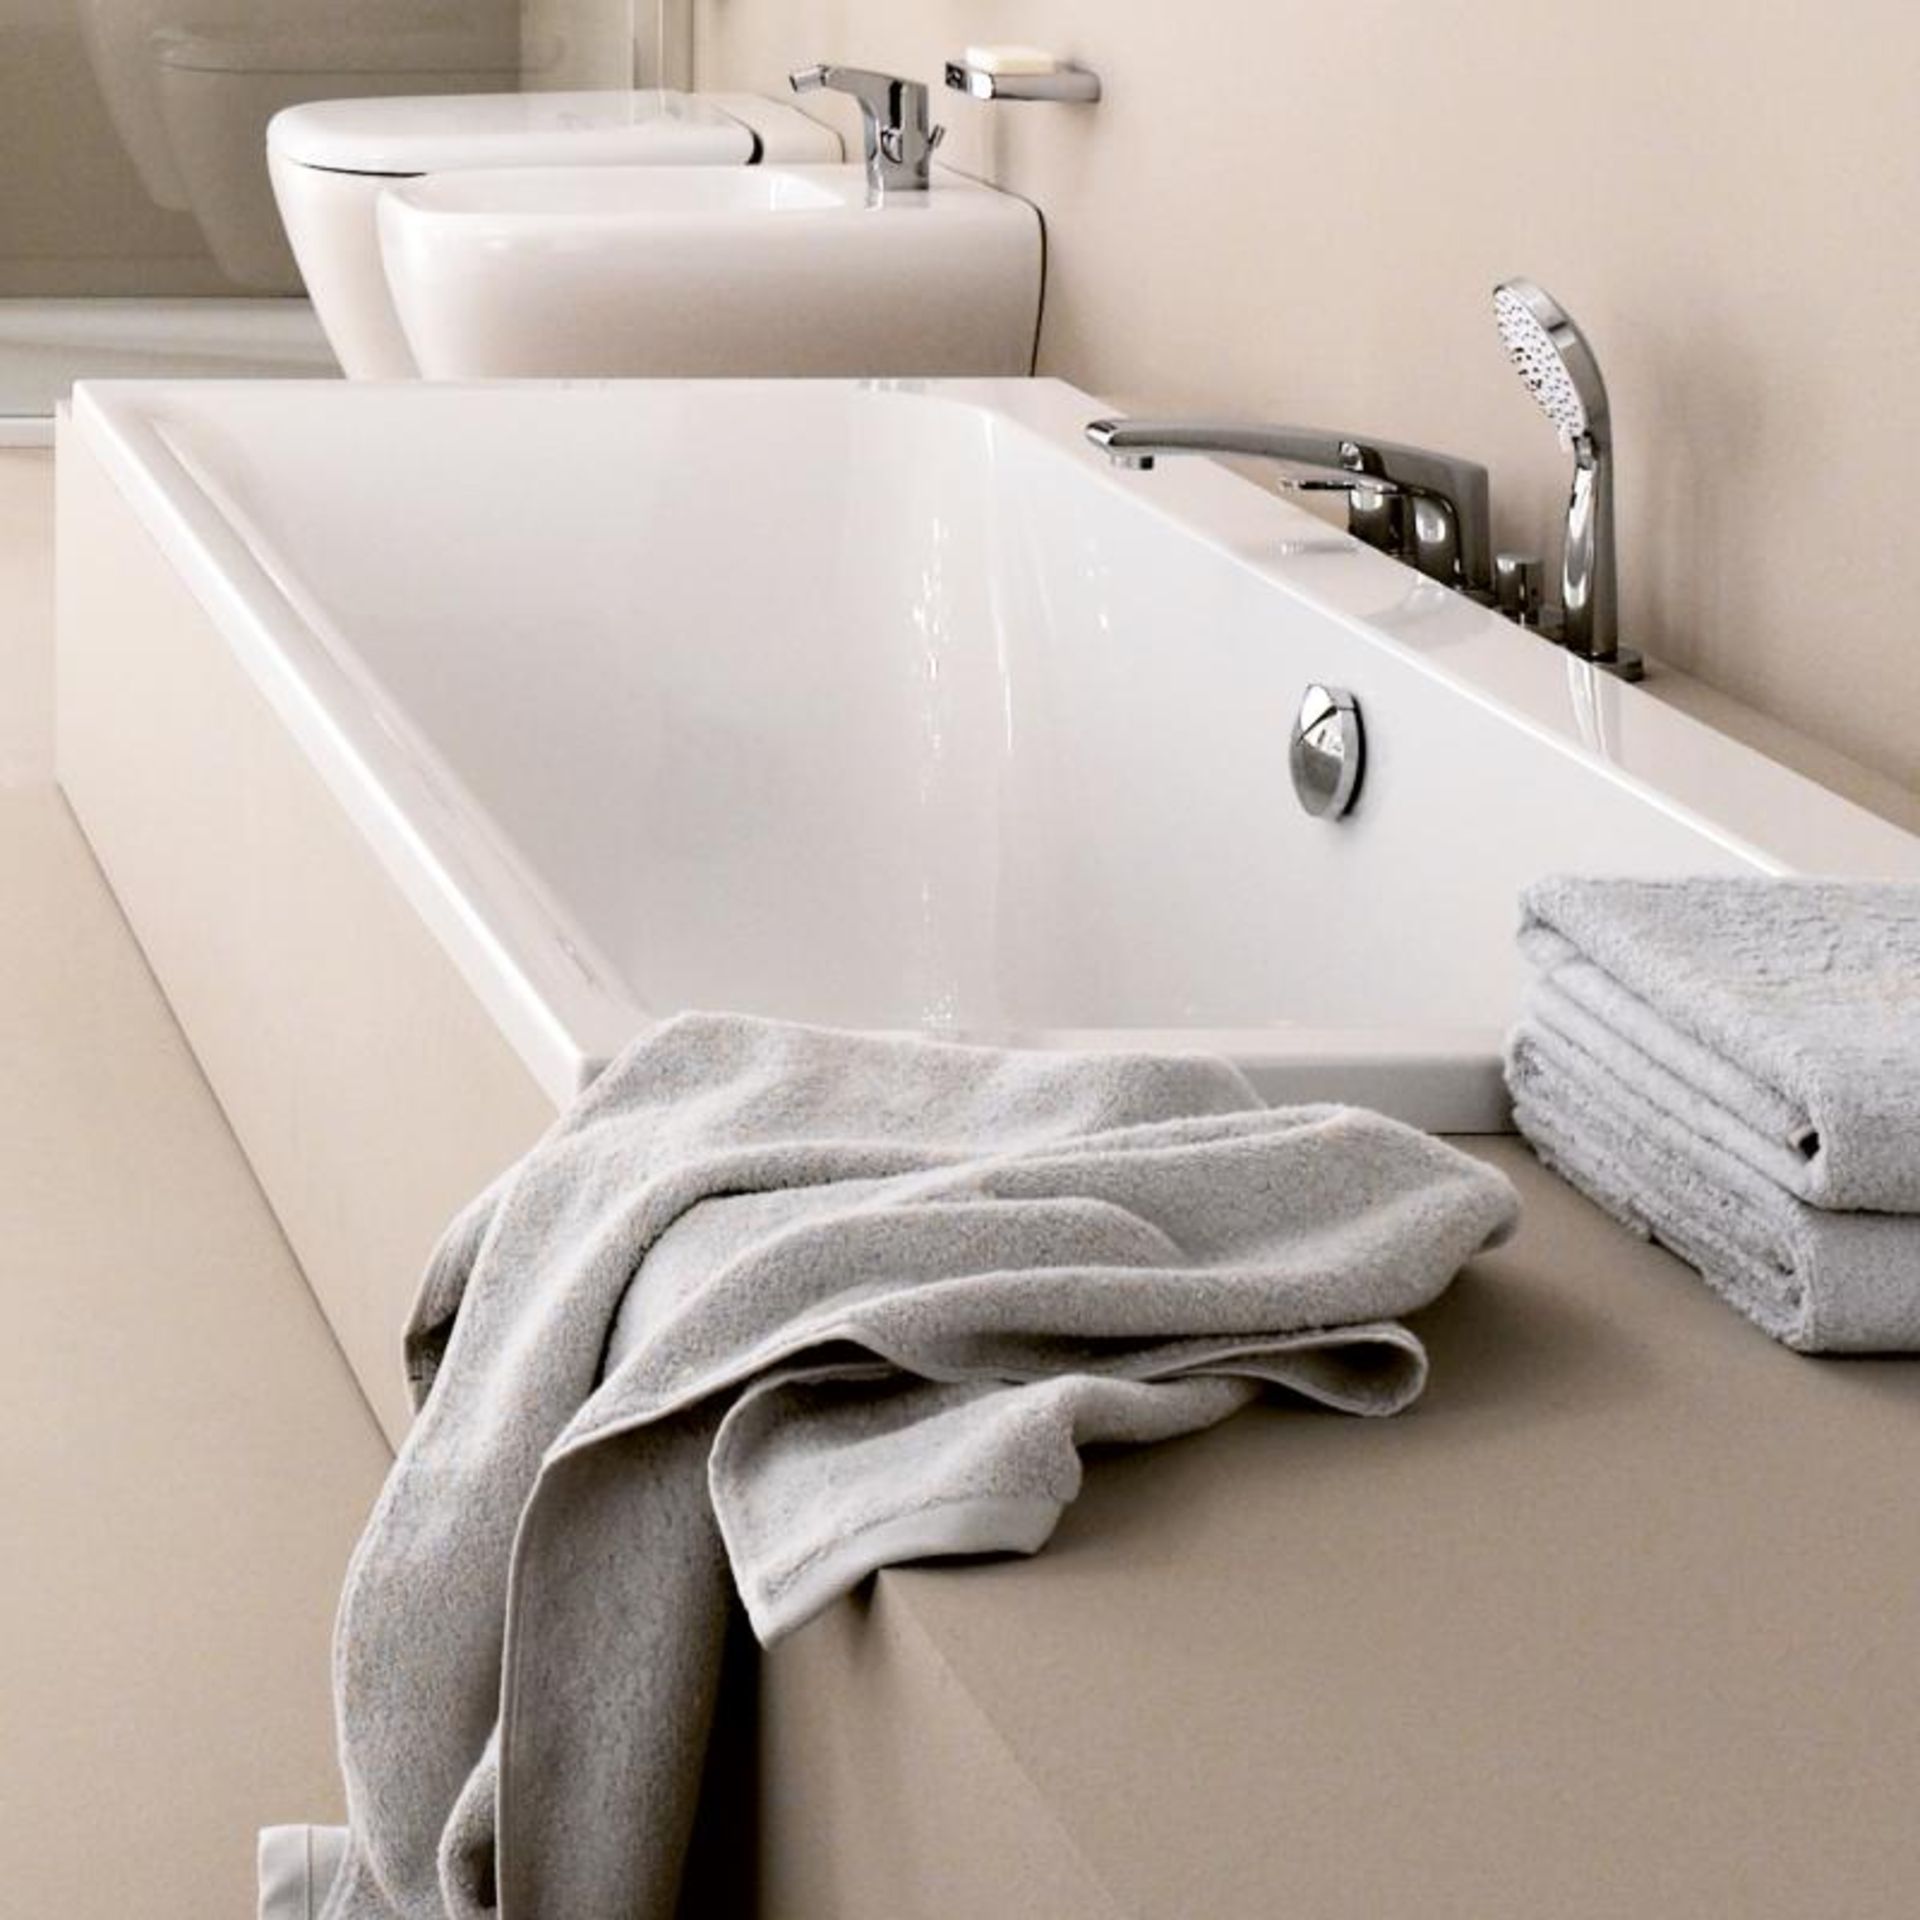 (RC12) 1700x750mm Keramag myDay Double Ended bathtub. RRP £981.03. white. If youre looking for... - Image 3 of 4